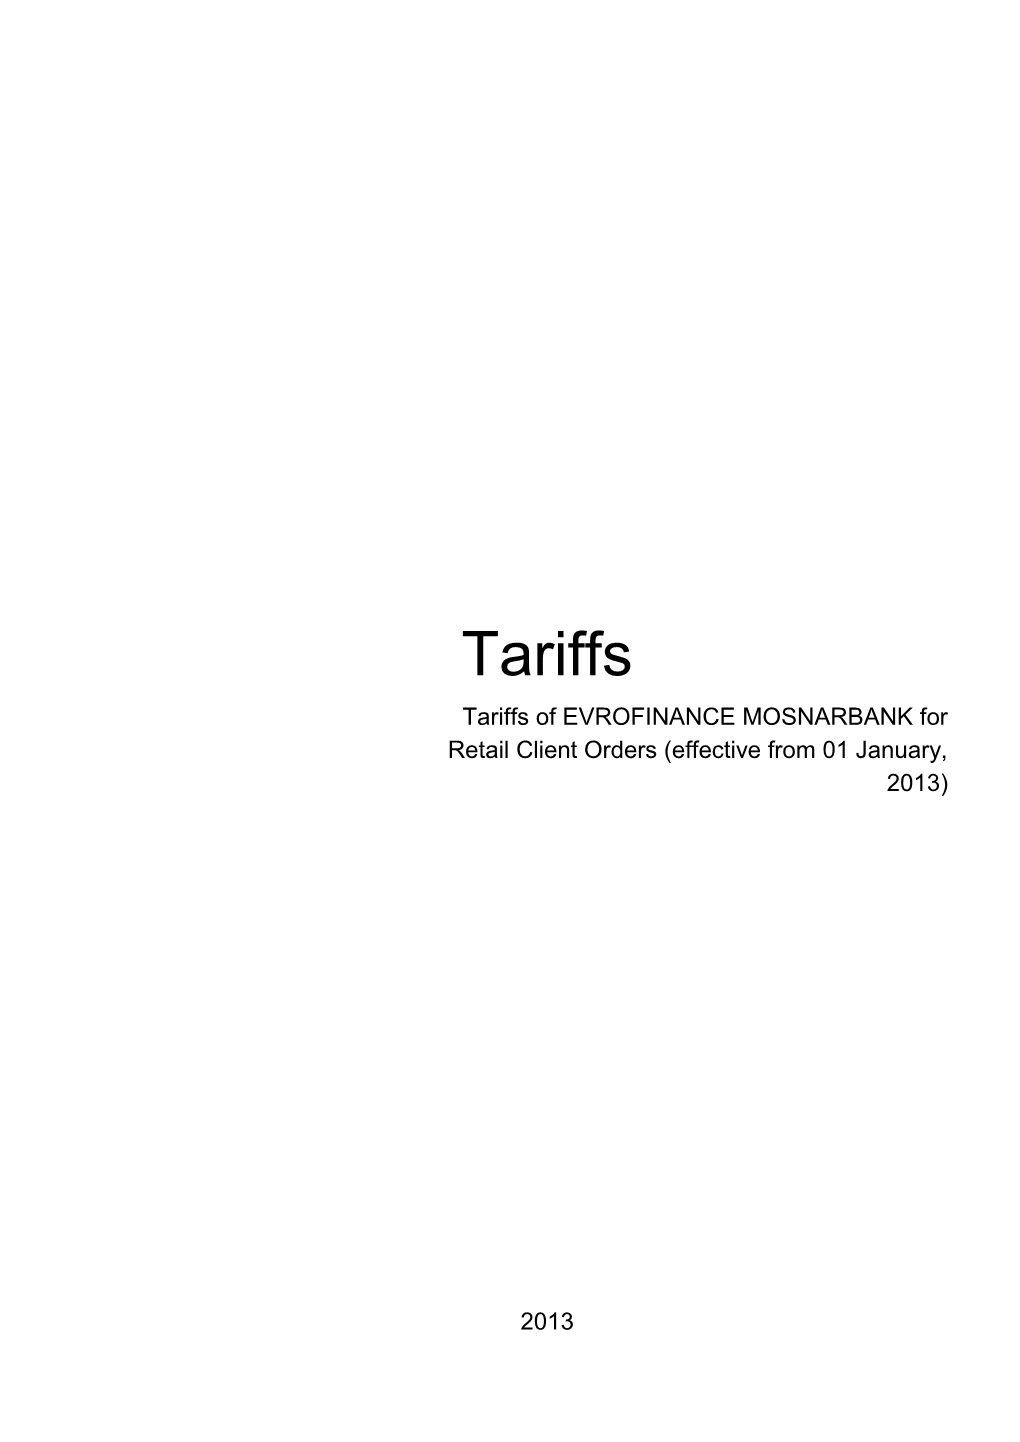 Tariffs Tariffs of EVROFINANCE MOSNARBANK for Retail Client Orders (Effective from 01 January, 2013)